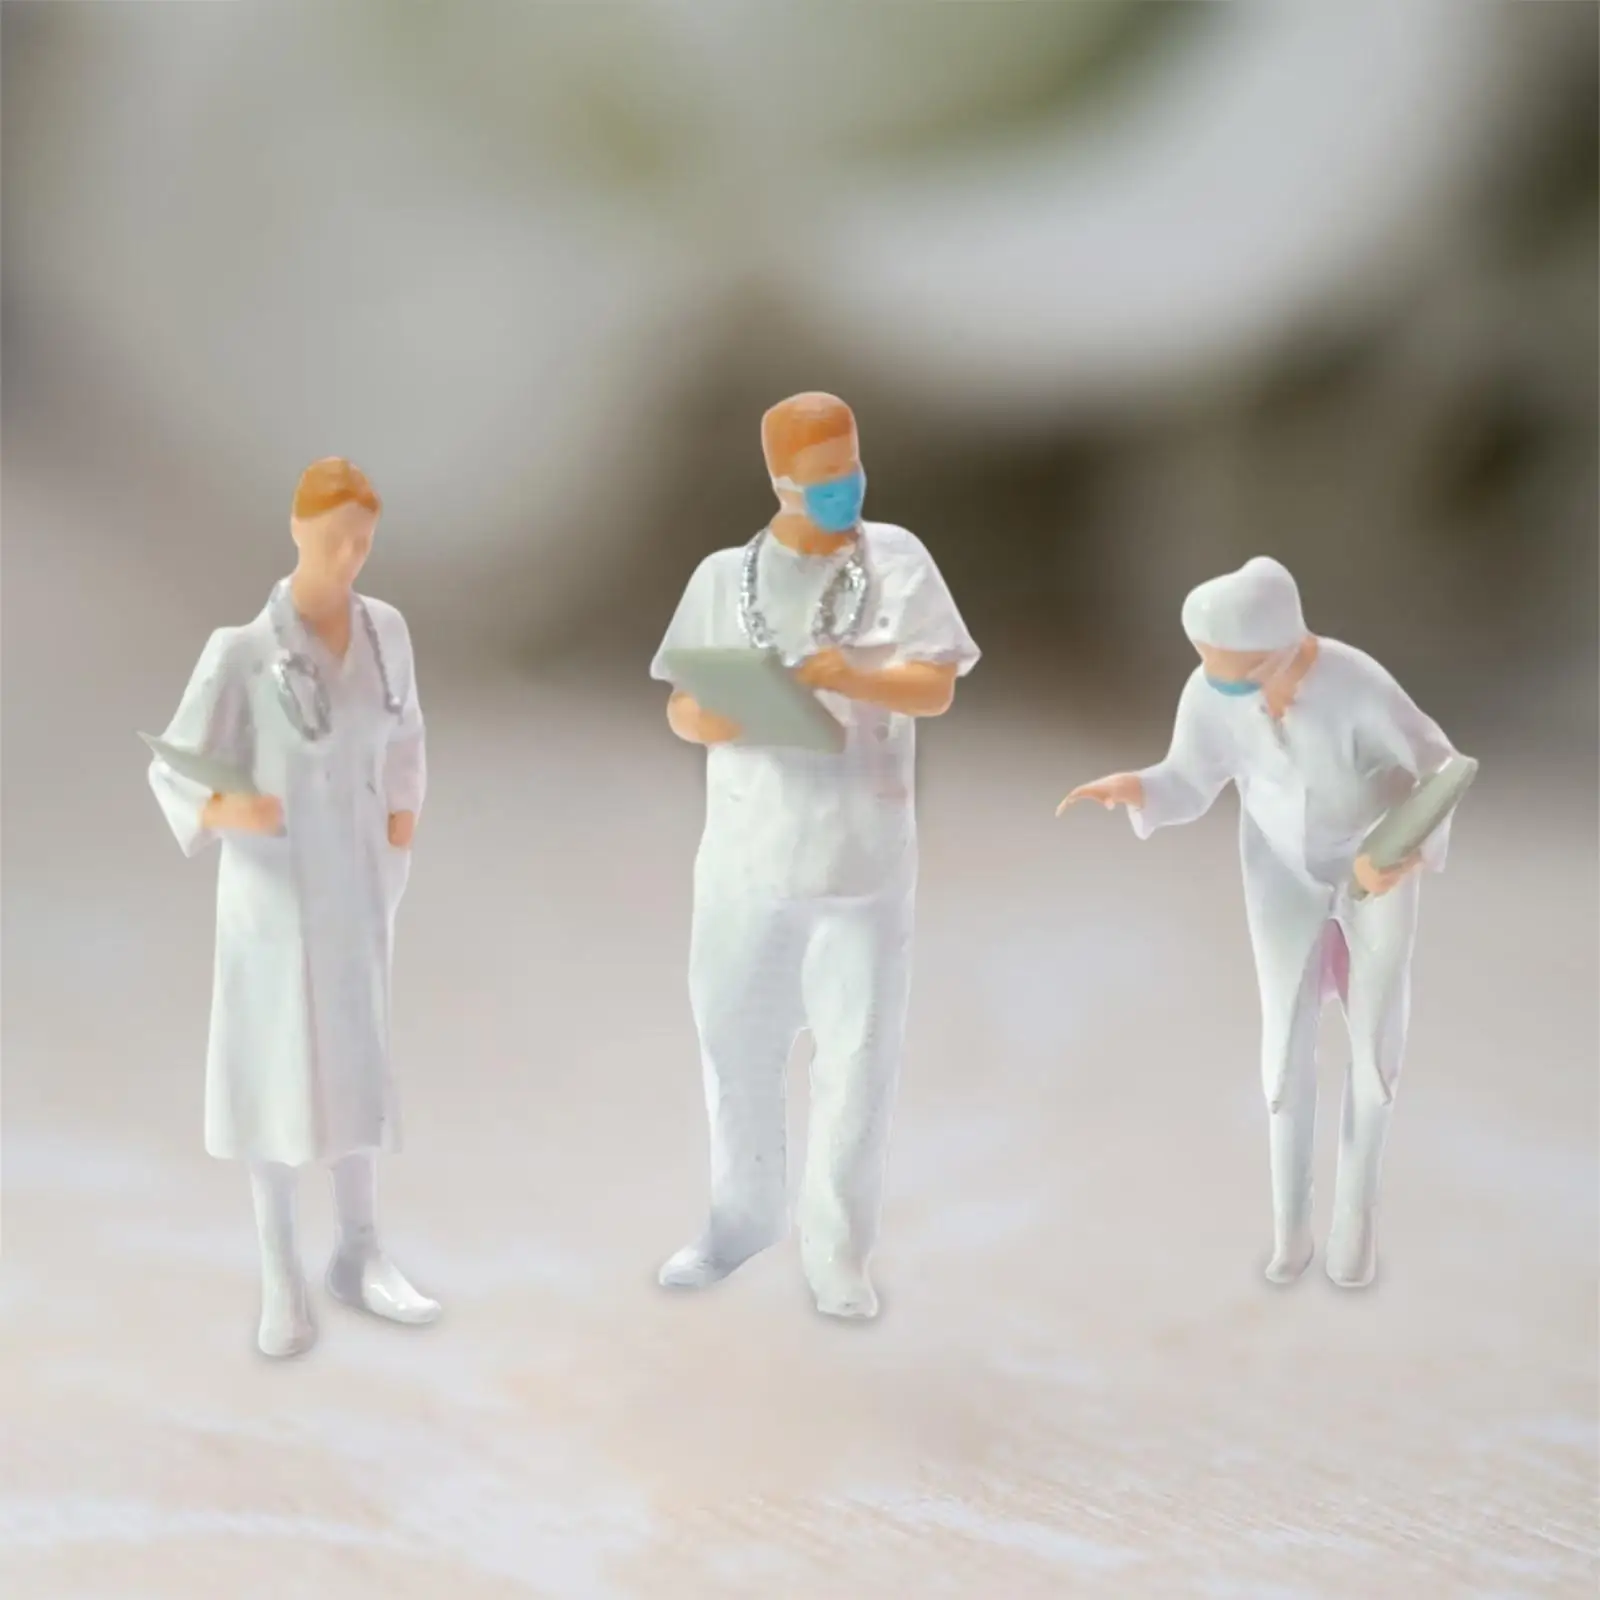 3 Pieces 1/87 People Figures Decor for Miniature Scenes Diorama Collectibles